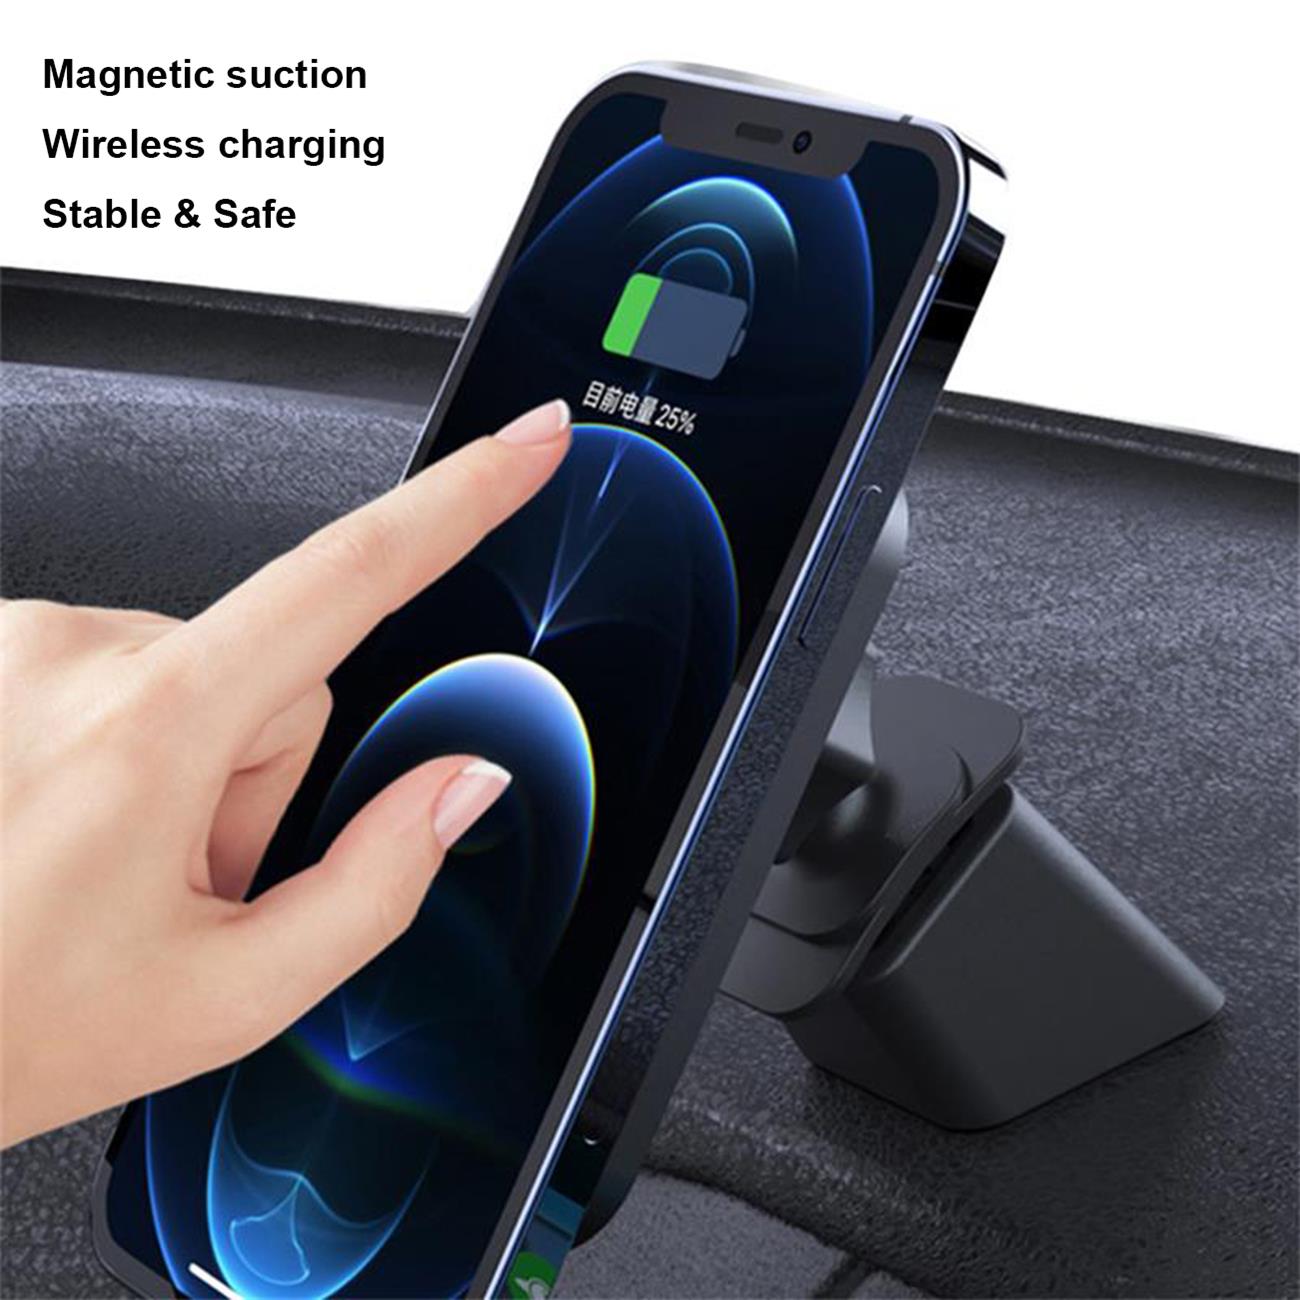 Wireless Car Charger Magnetic Suction 15W Fast Charge For Smart Phone